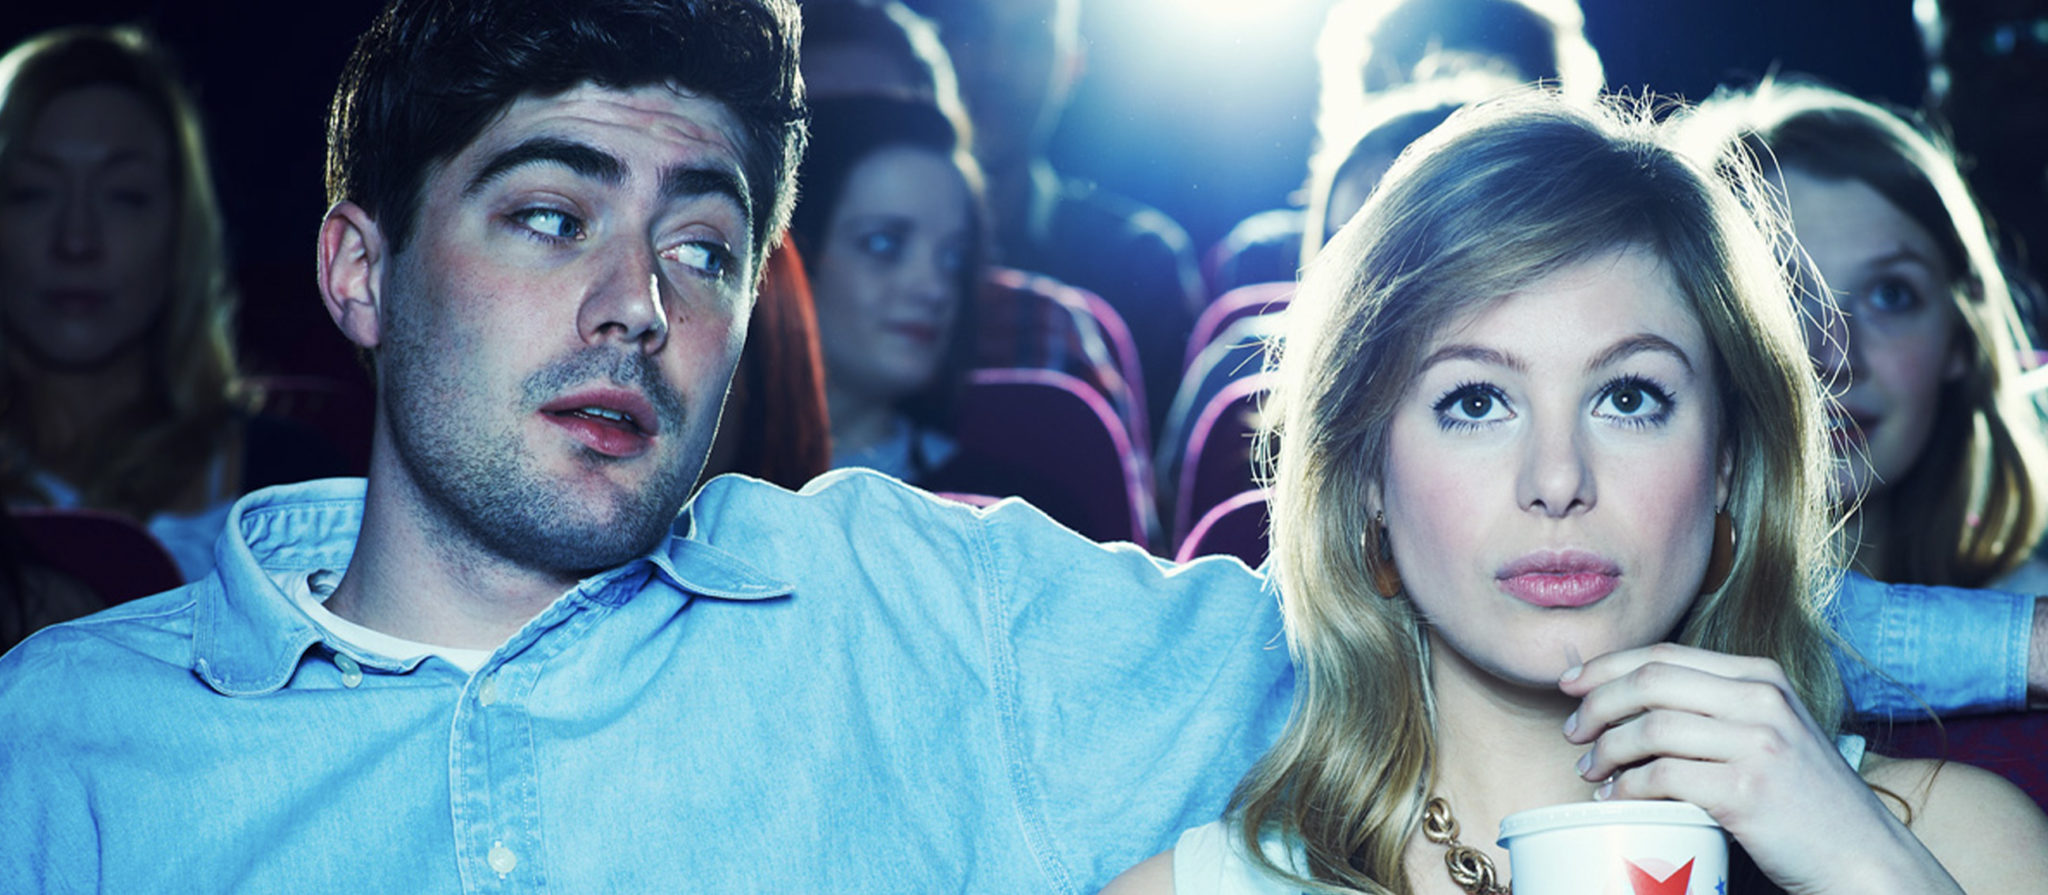 People Share Their Absolute Worst Dating Horror Stories